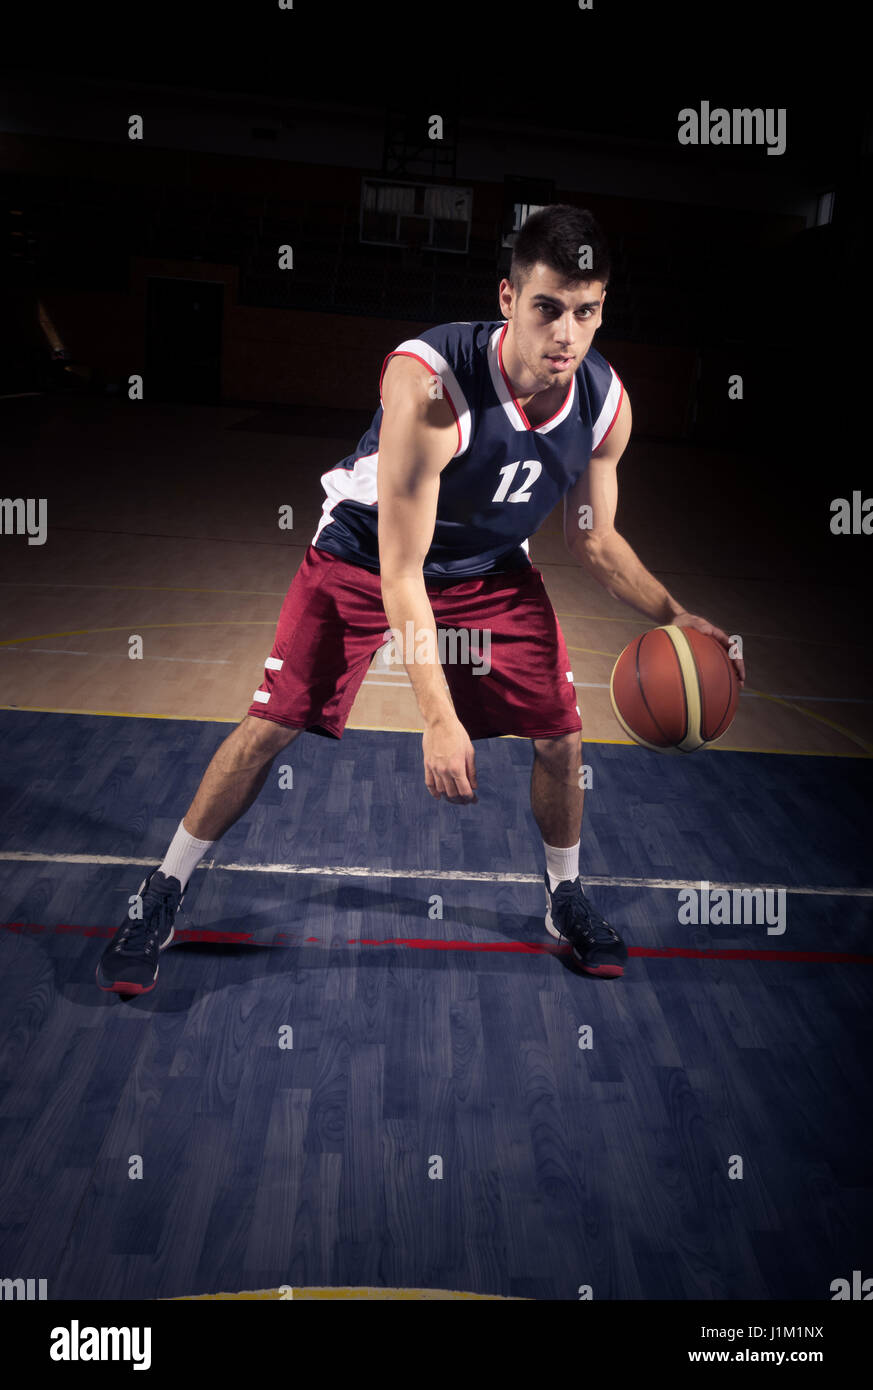 one young man, basketball player dribble ball, indoors court Stock Photo